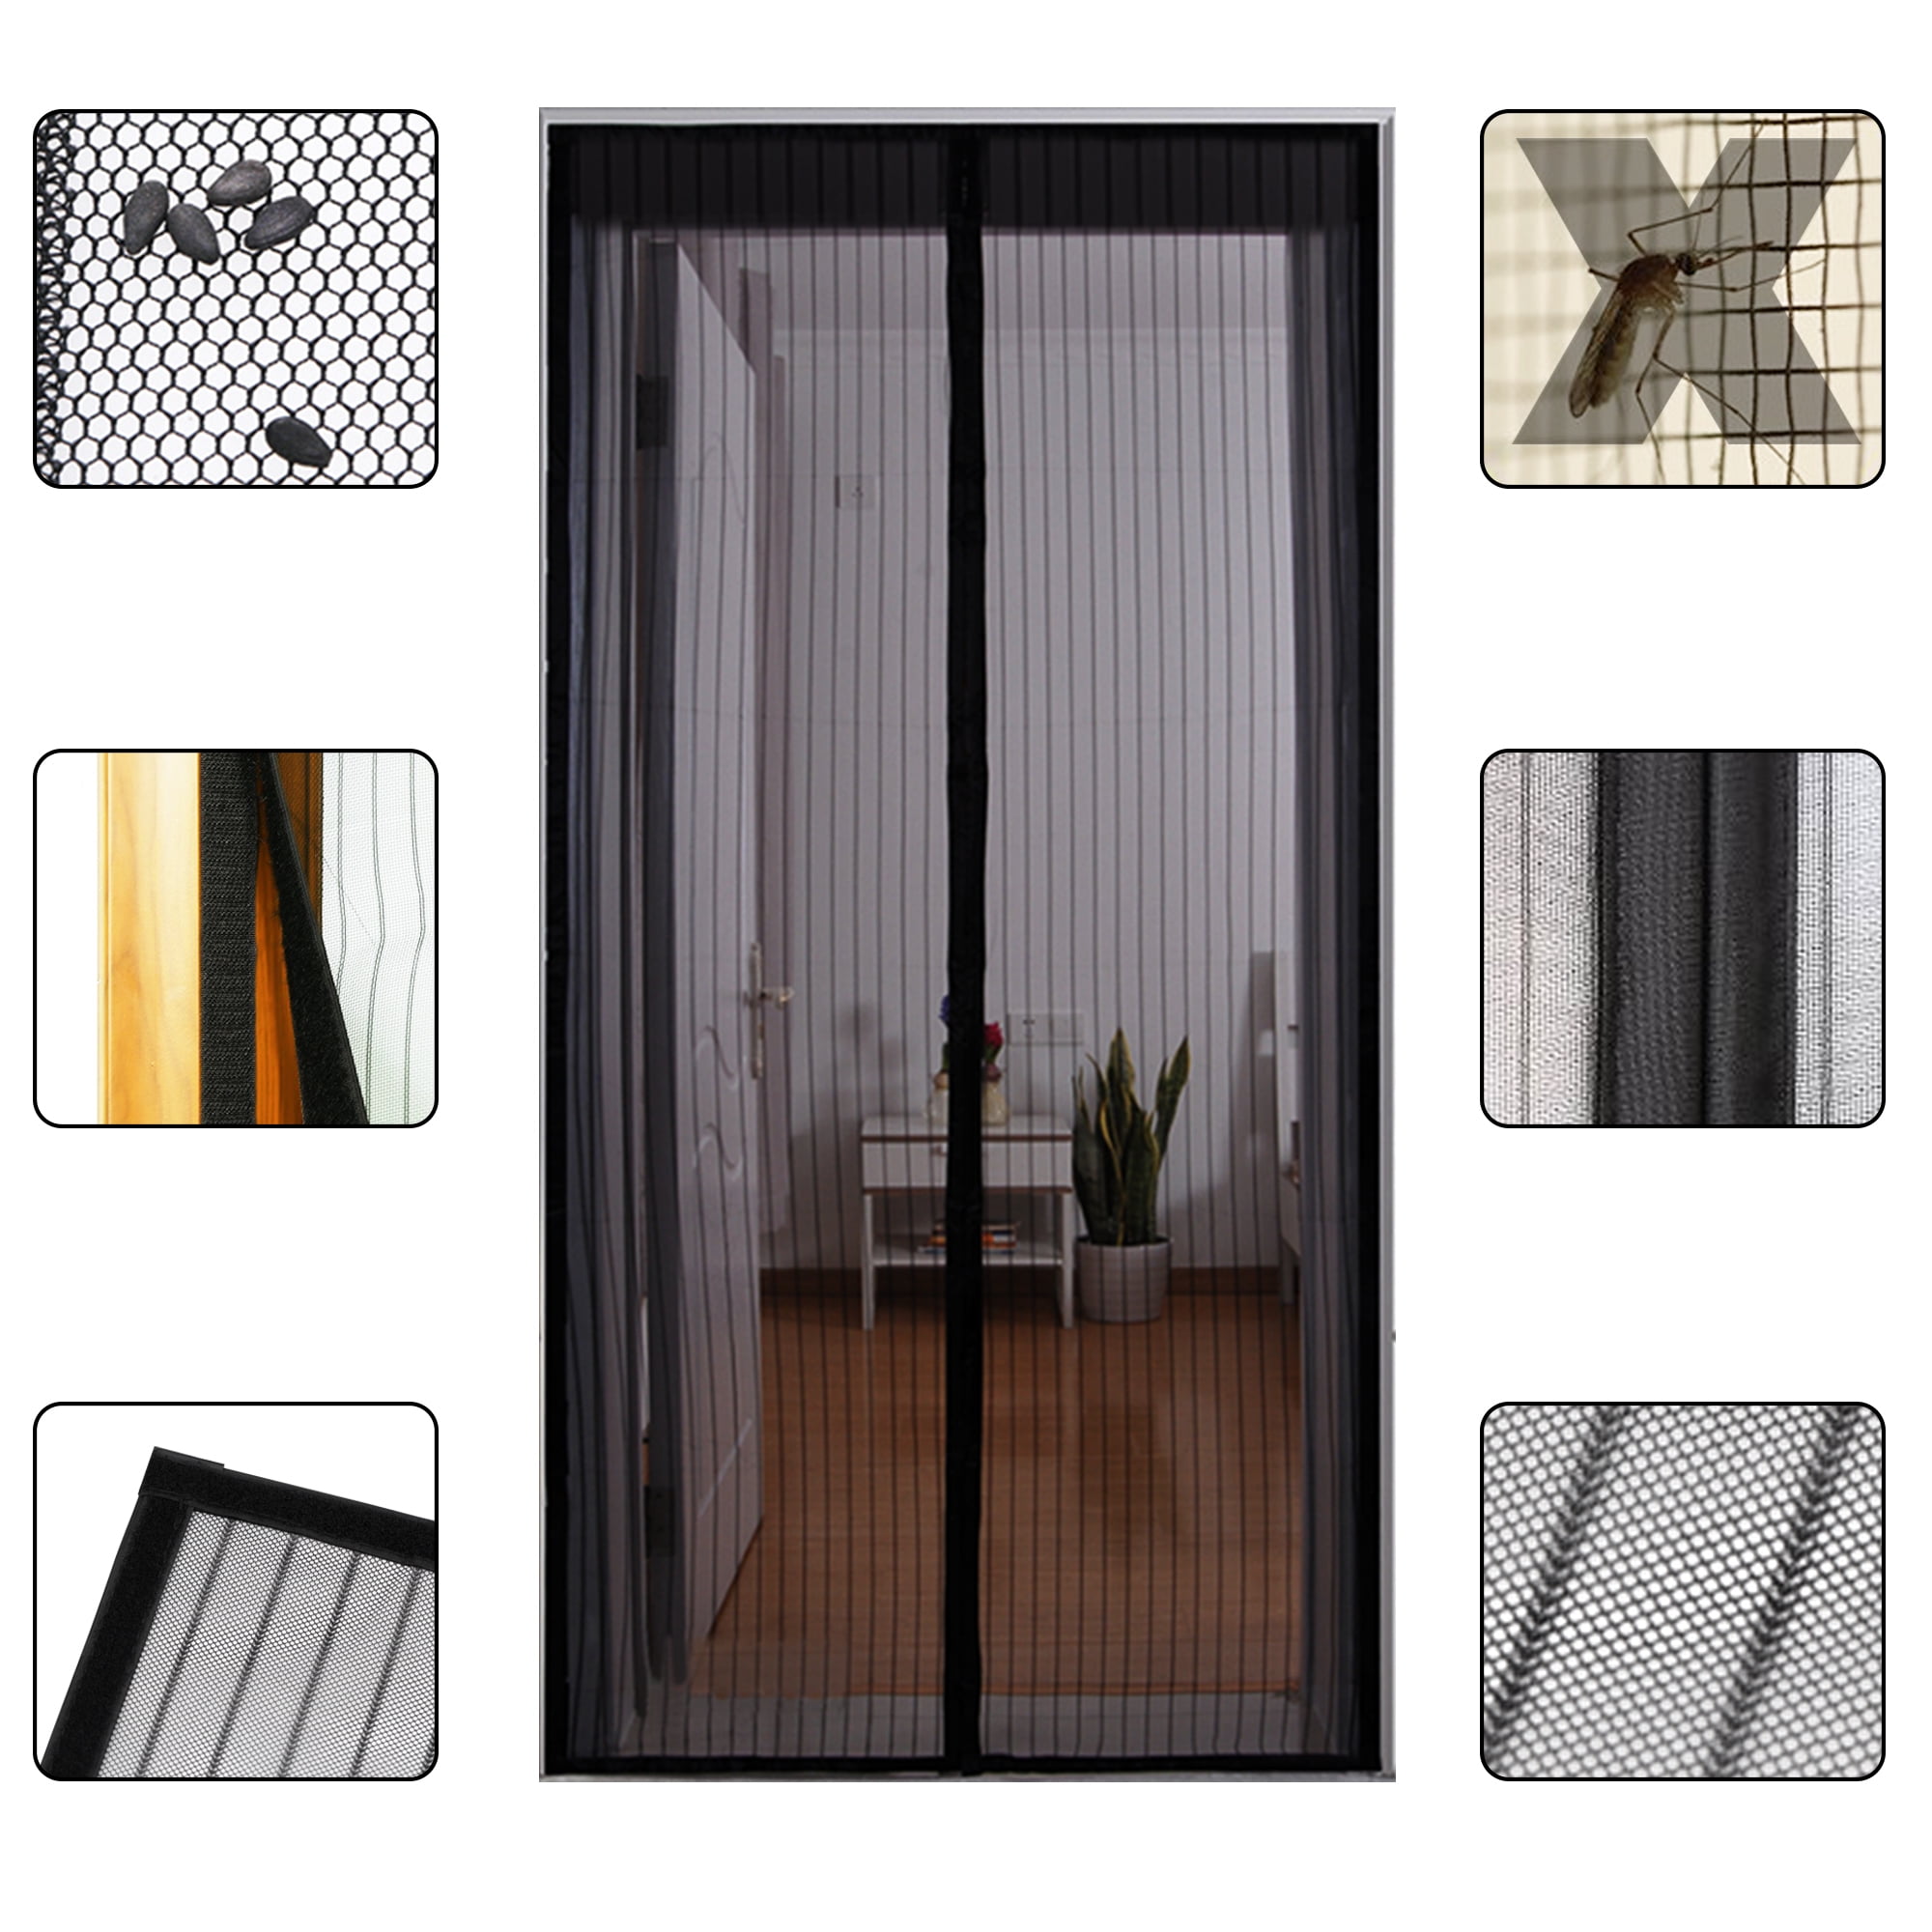 Mosquito insect net mesh guard for doors fly screen curtain bug brown 95 x 210 